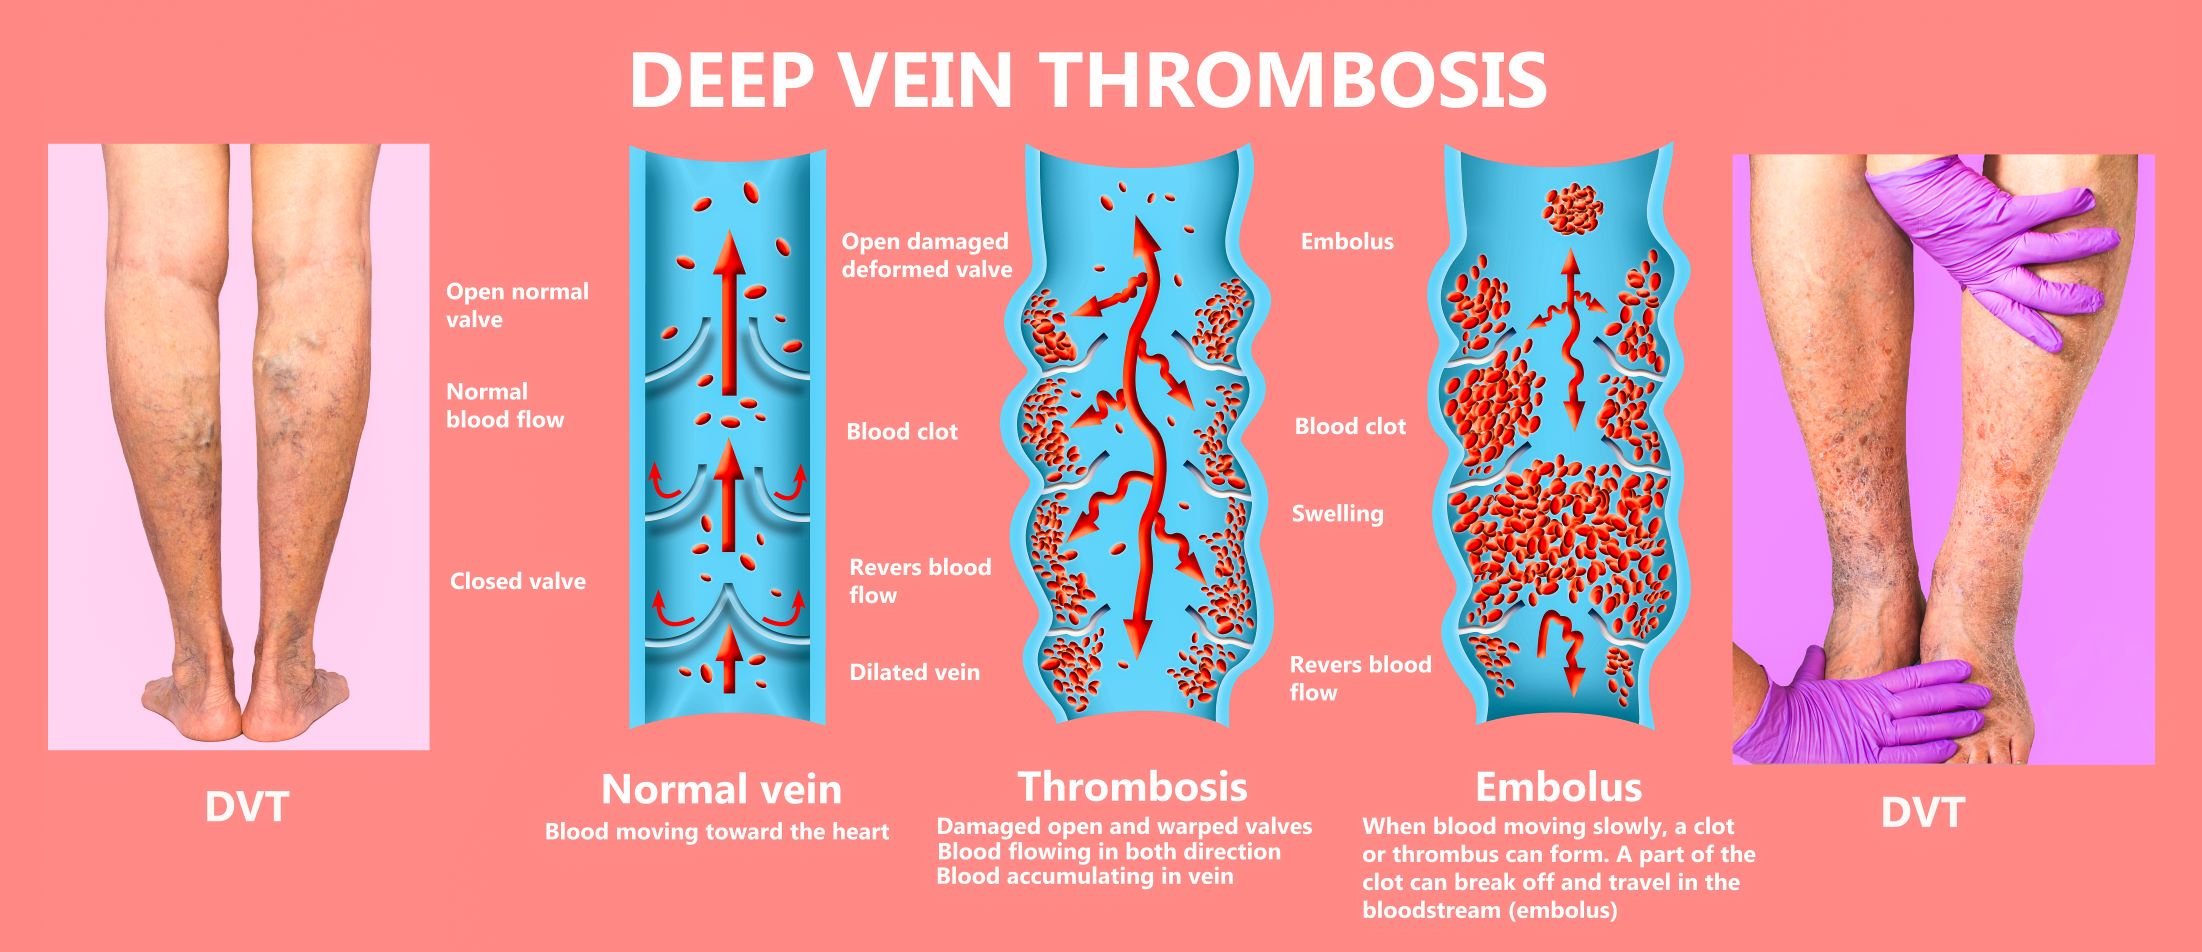 March is DVT Awareness Month